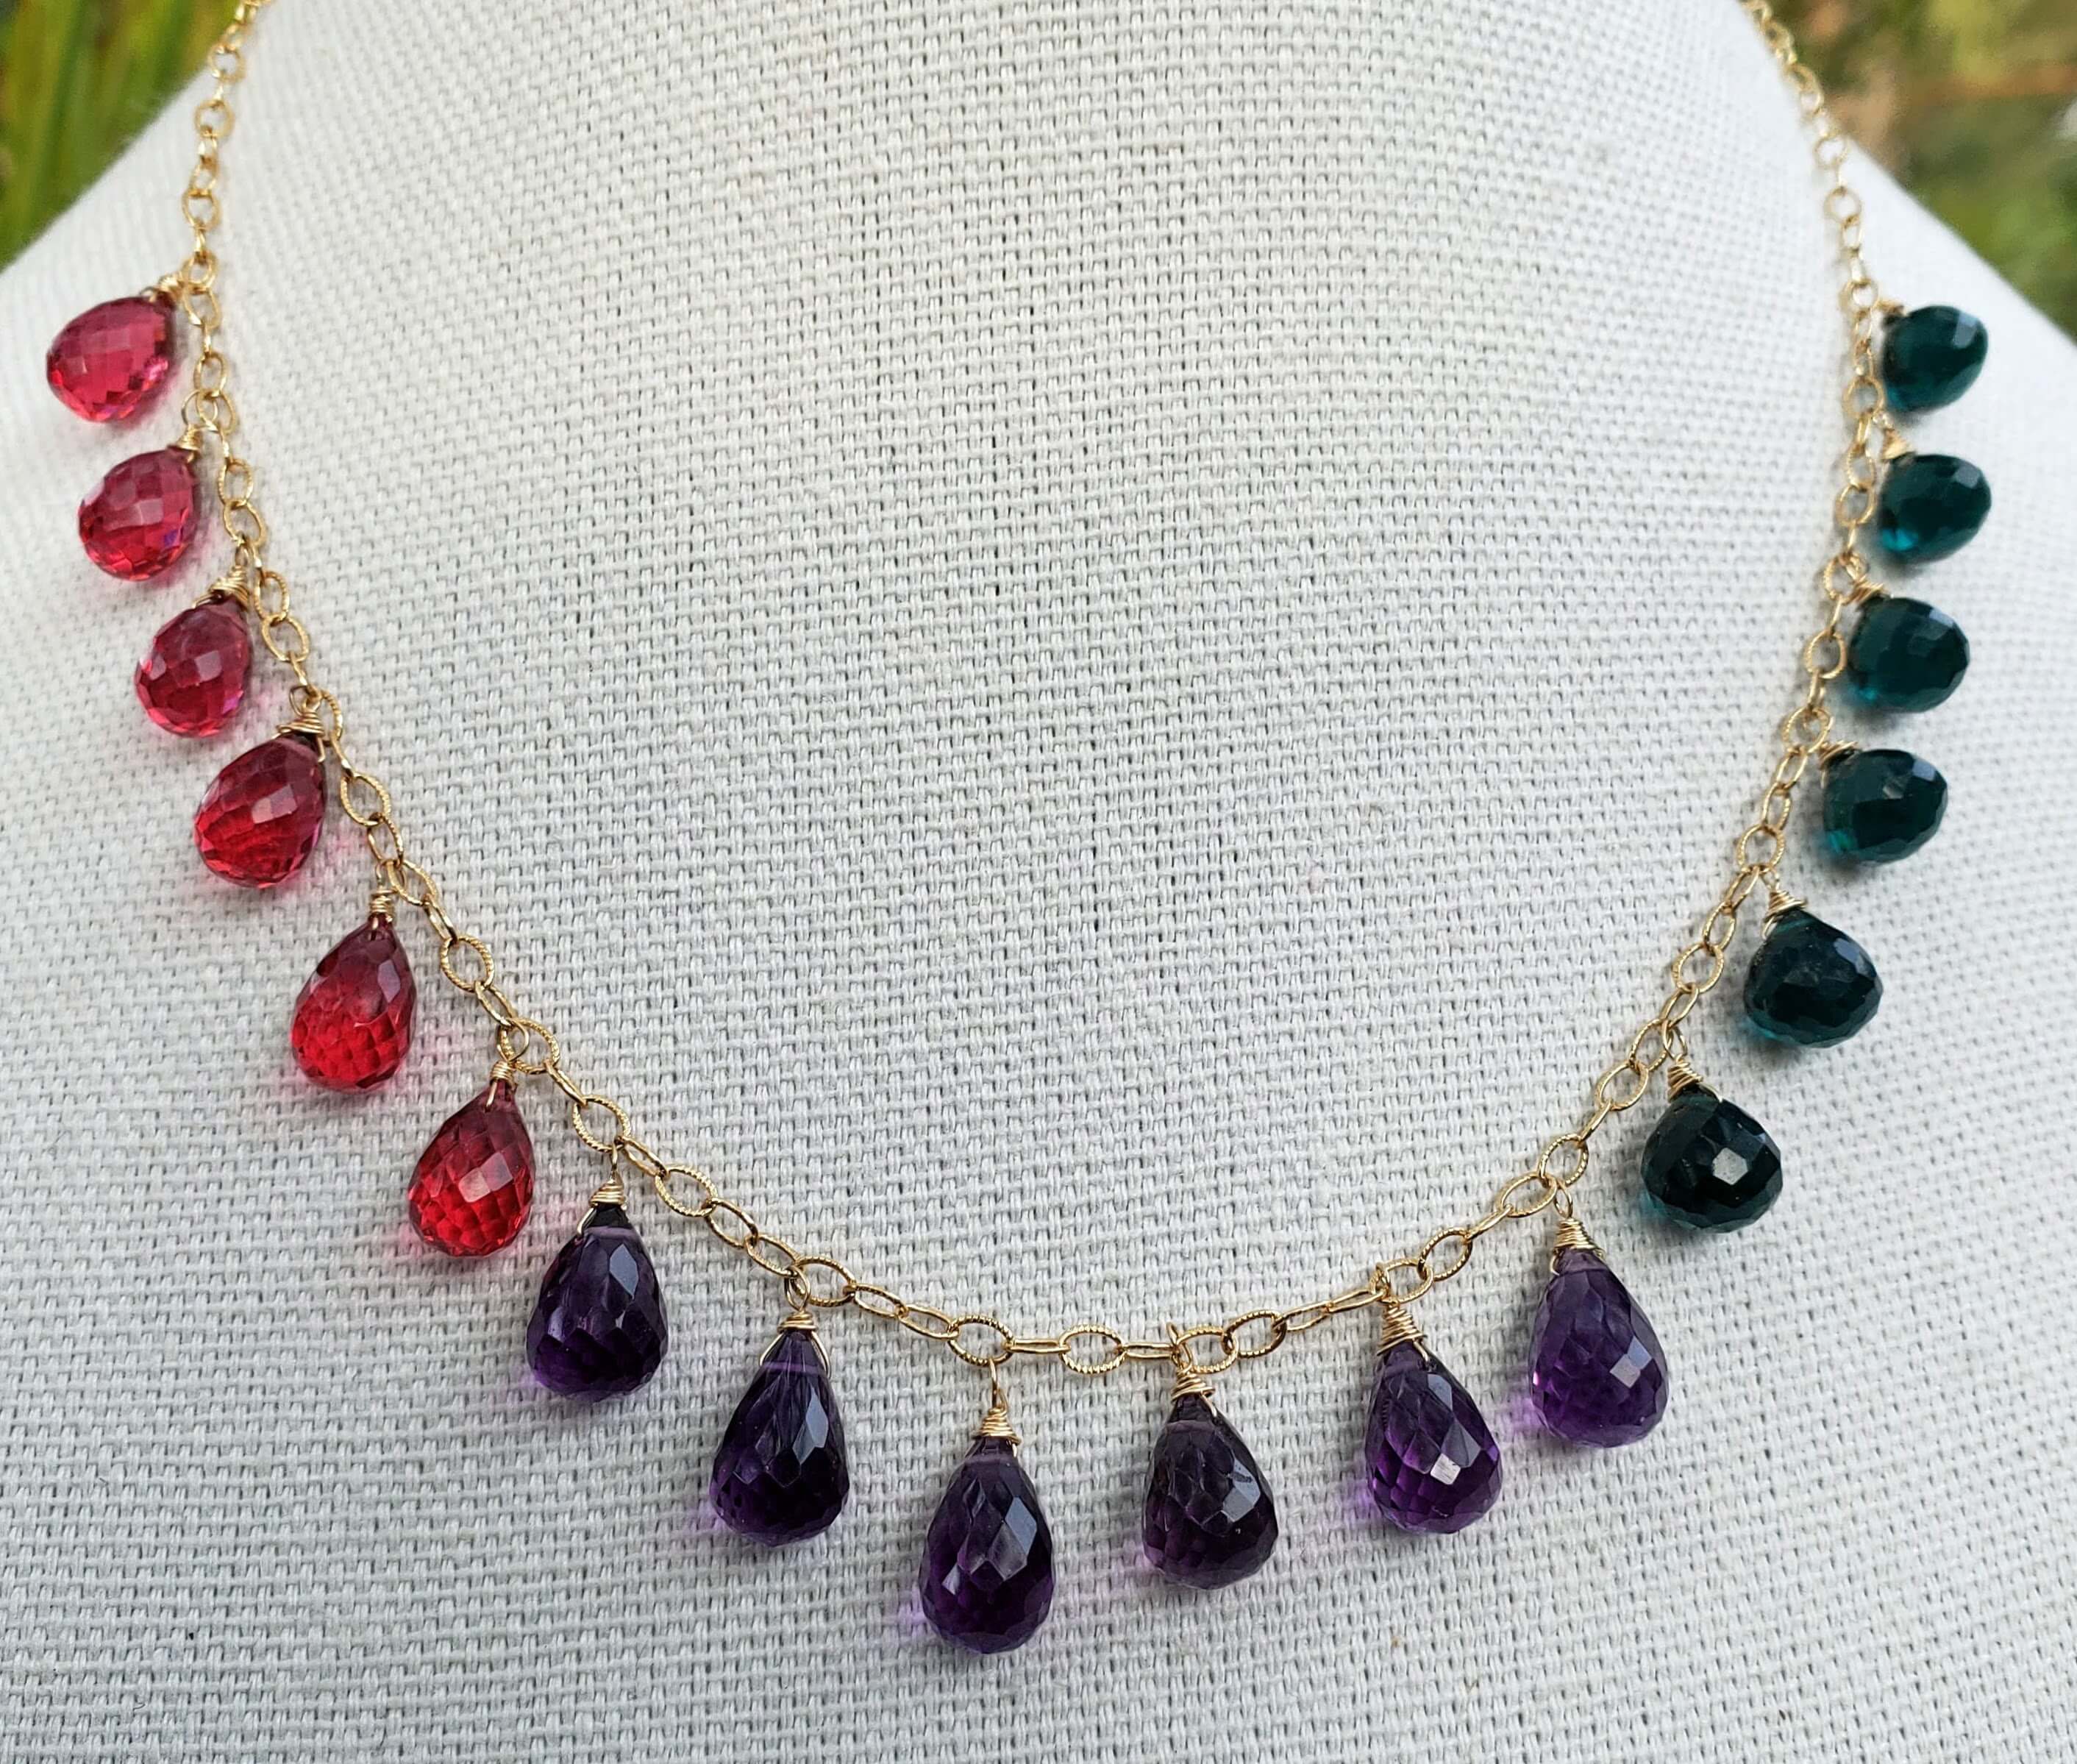 Sapphire, Amethyst and Tourmaline Necklace